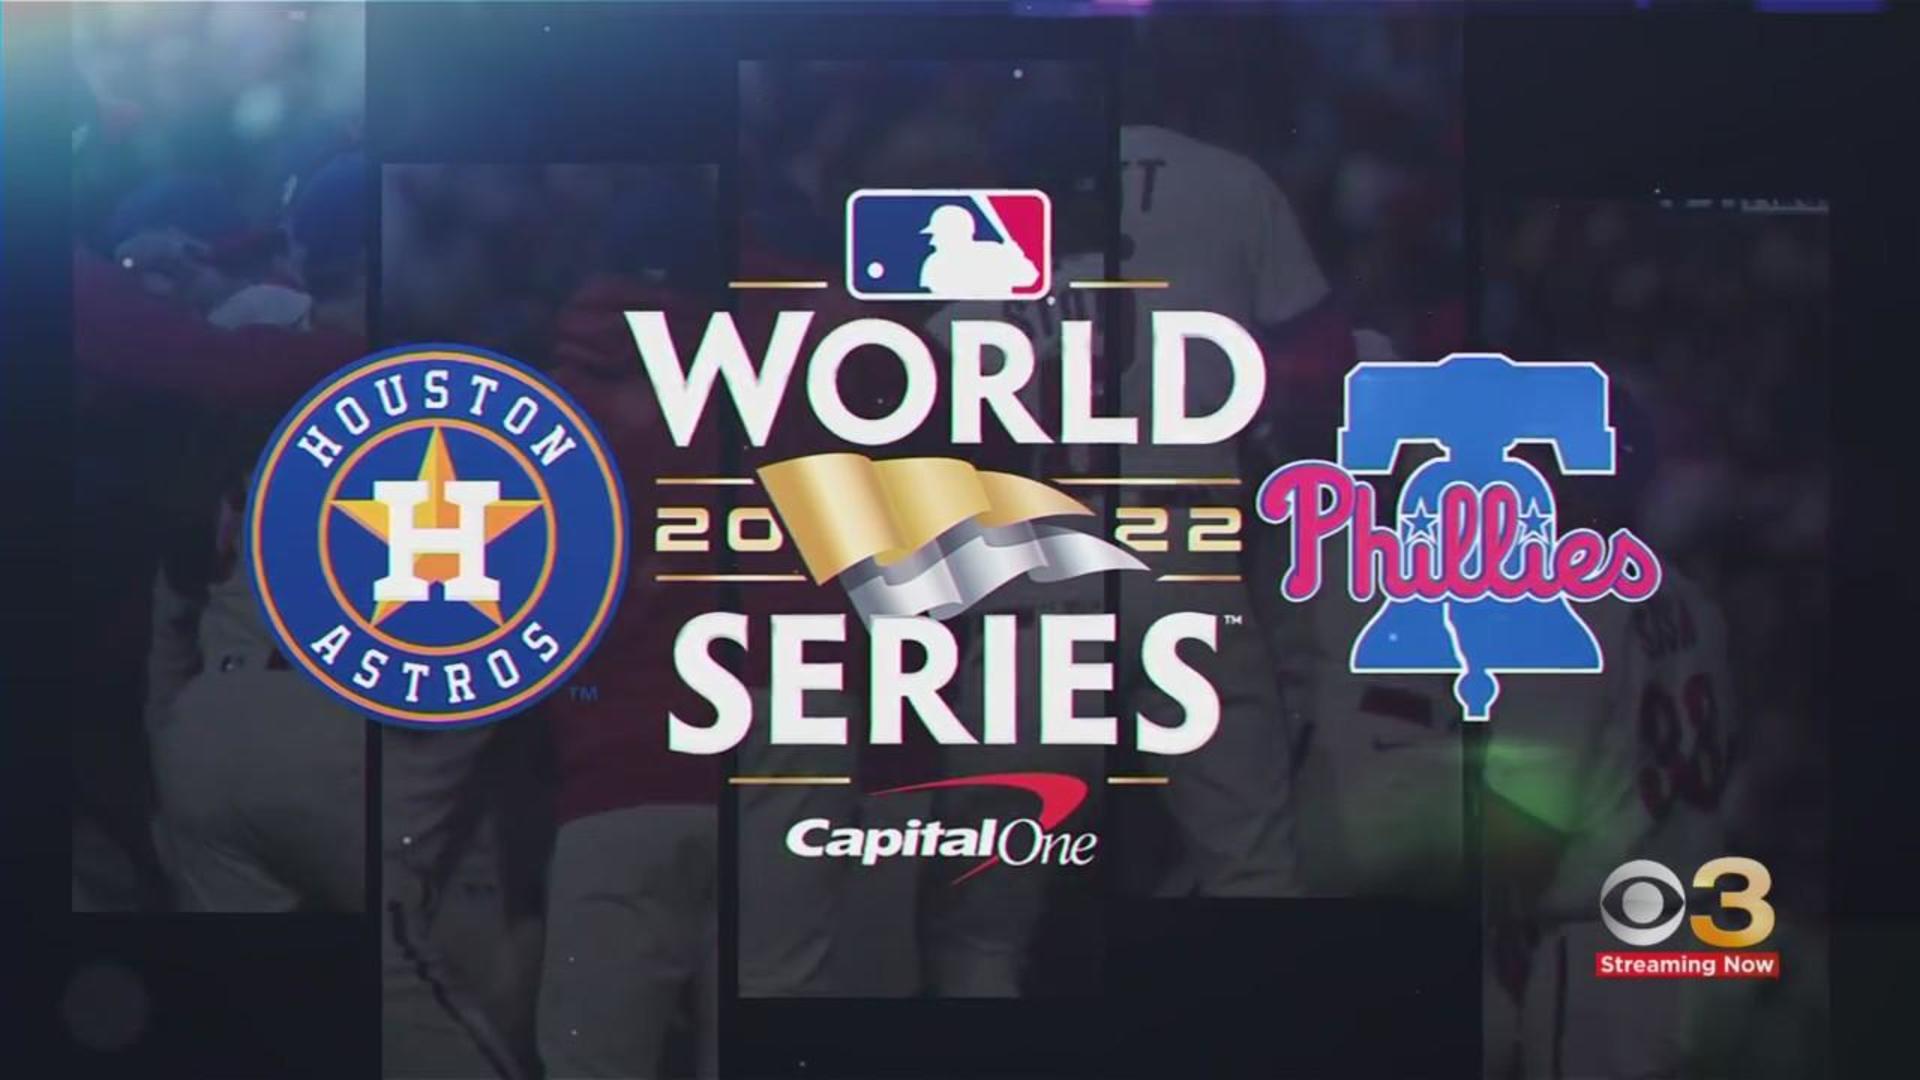 AAA spokesperson has advice for fans booking last minute trip to Houston for World Series